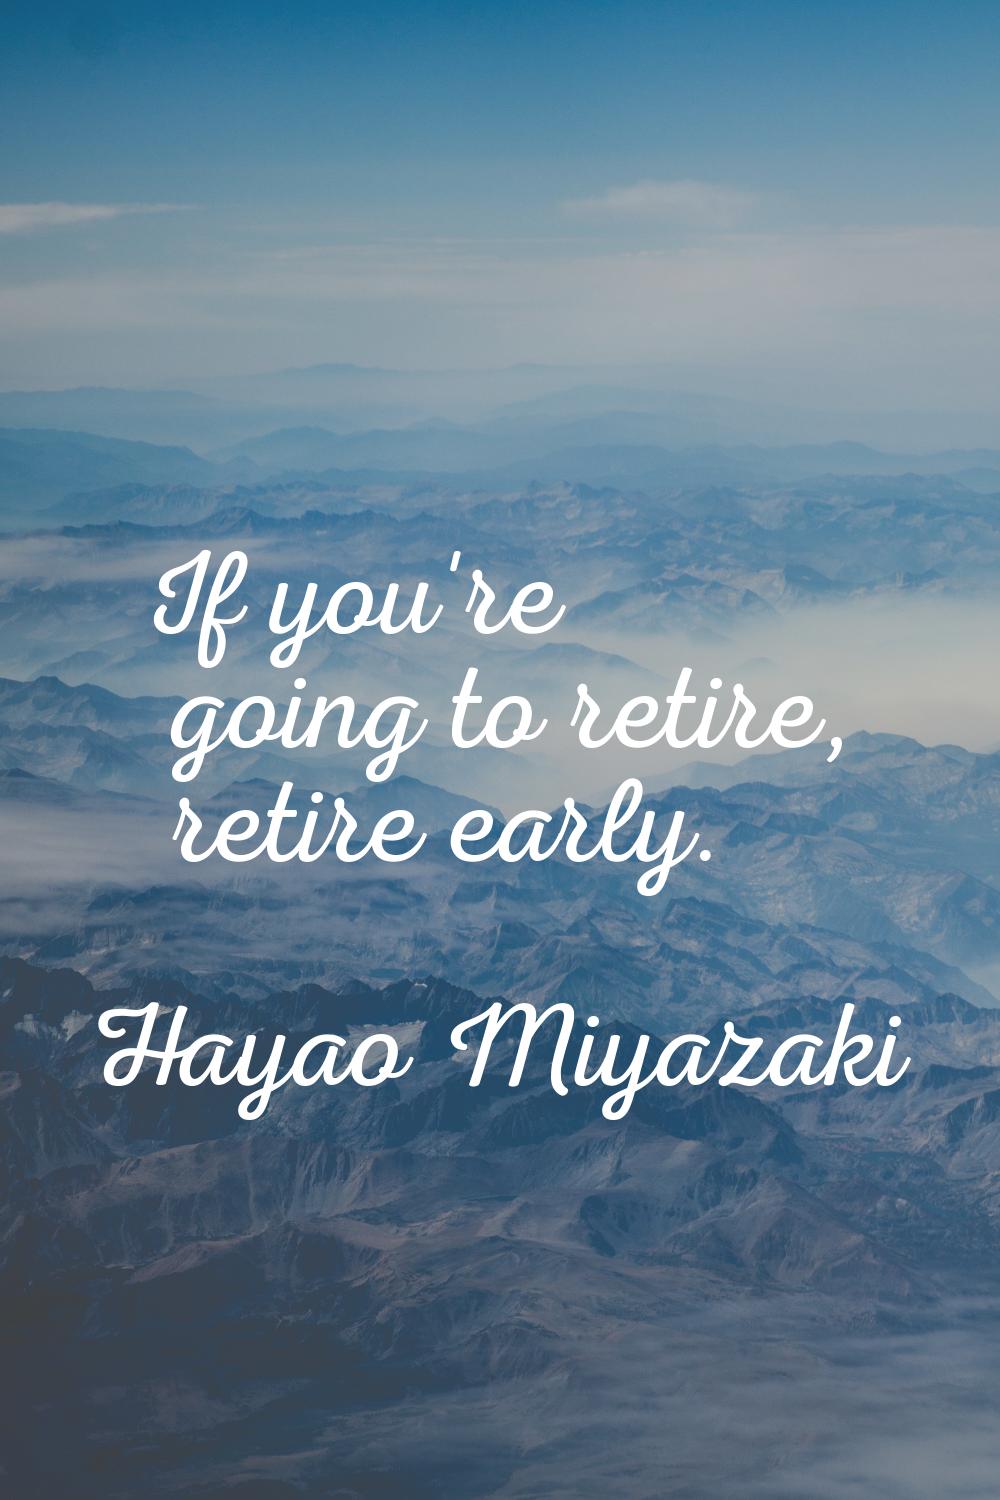 If you're going to retire, retire early.